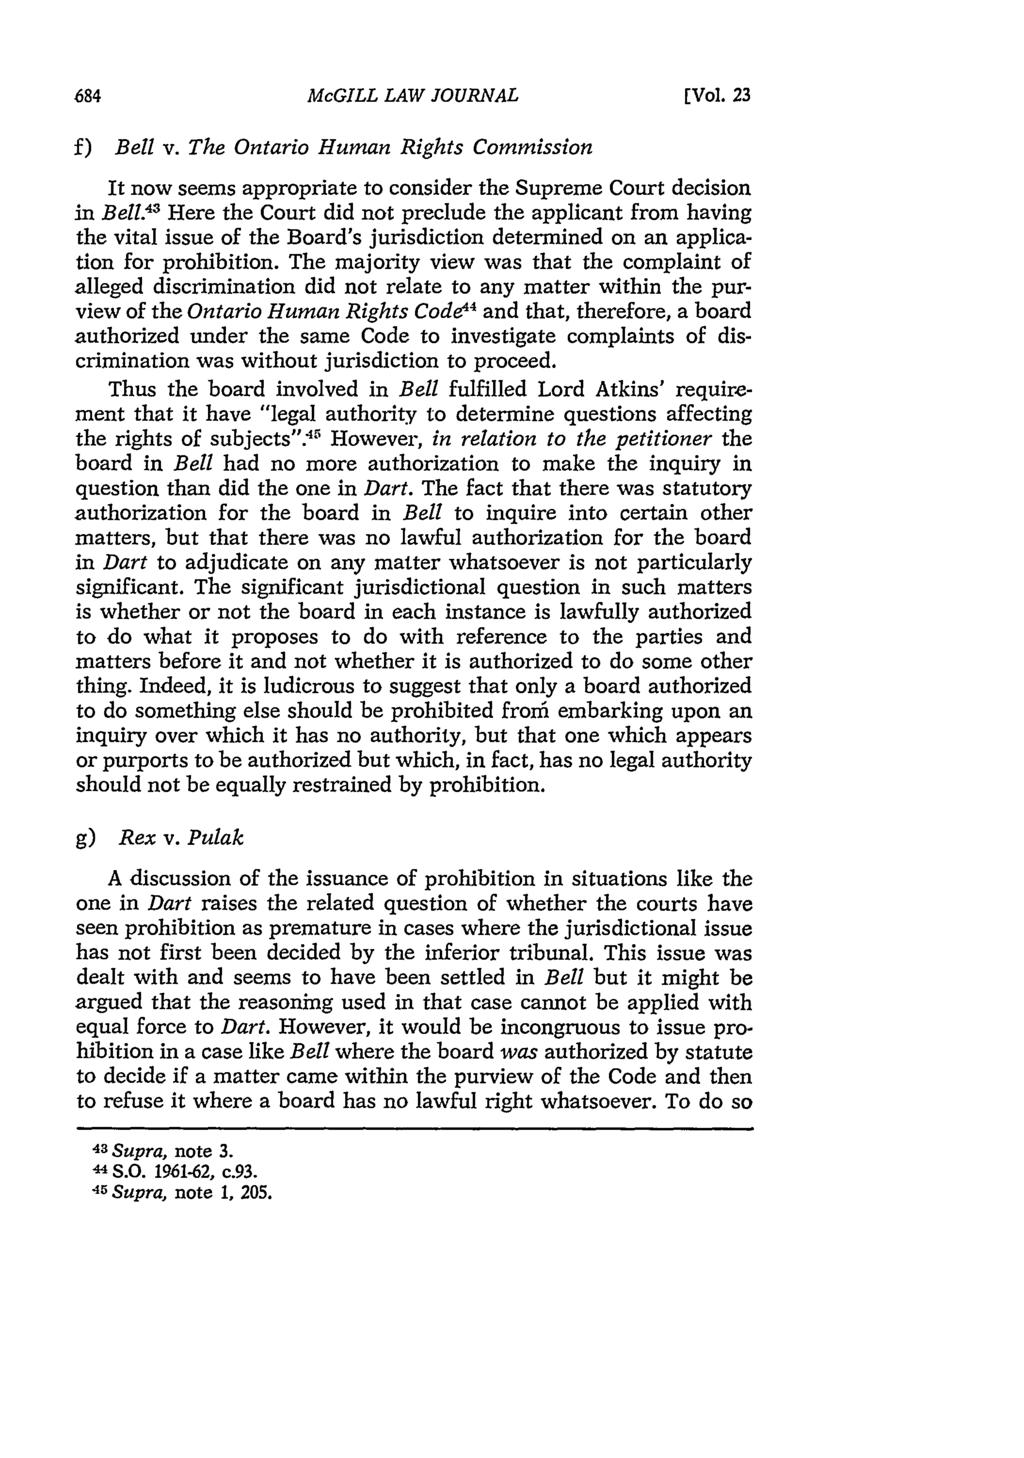 McGILL LAW JOURNAL [Vol. 23 f) Bell v. The Ontario Human Rights Commission It now seems appropriate to consider the Supreme Court decision in Bell.